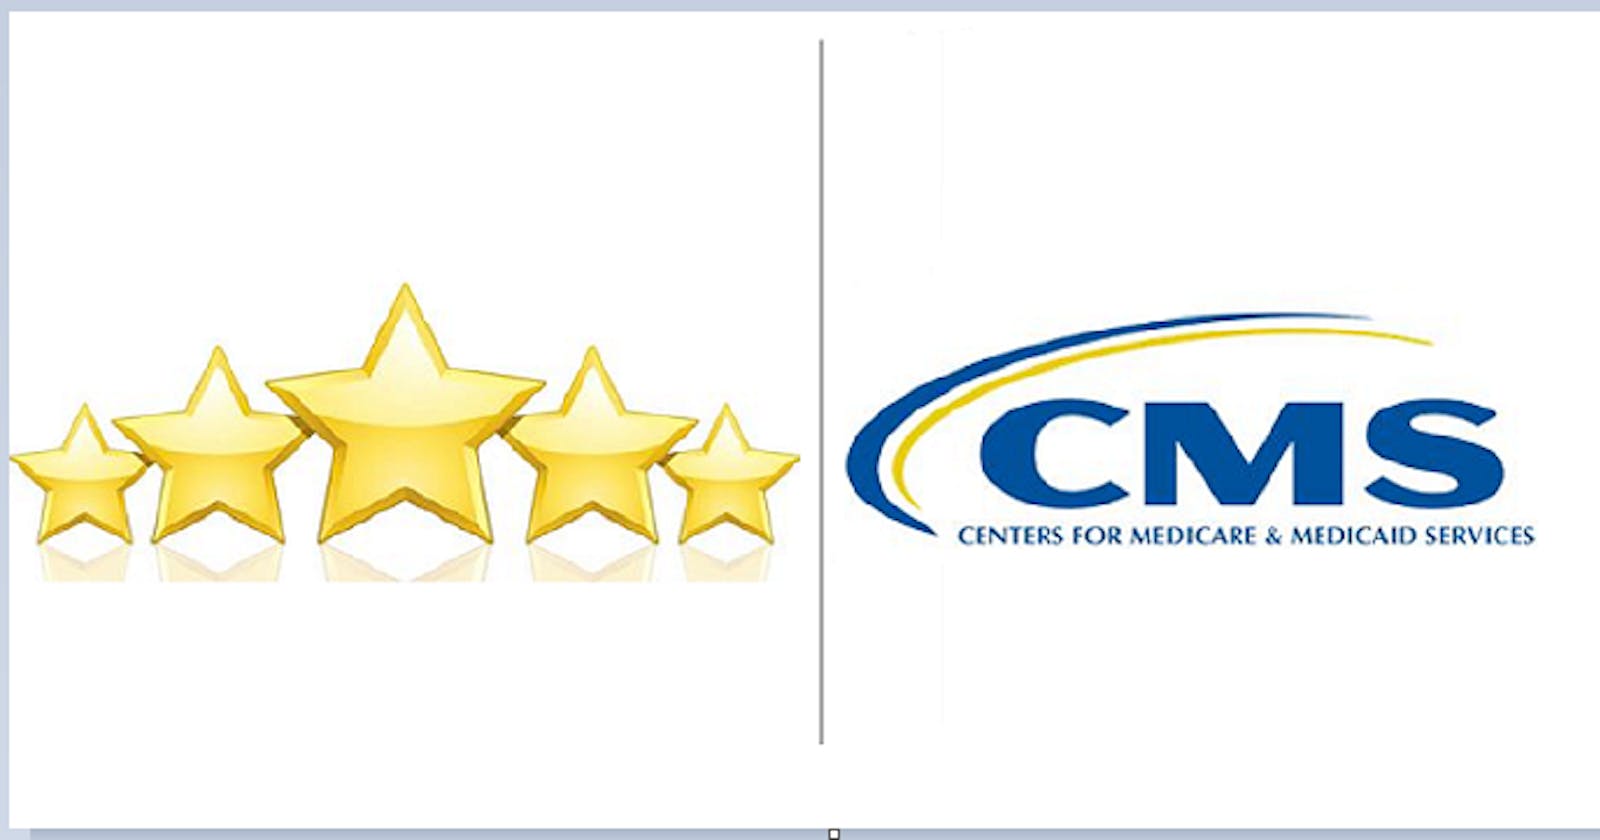 Leverage an Analytic Approach to Improve CMS Star Rating Performance